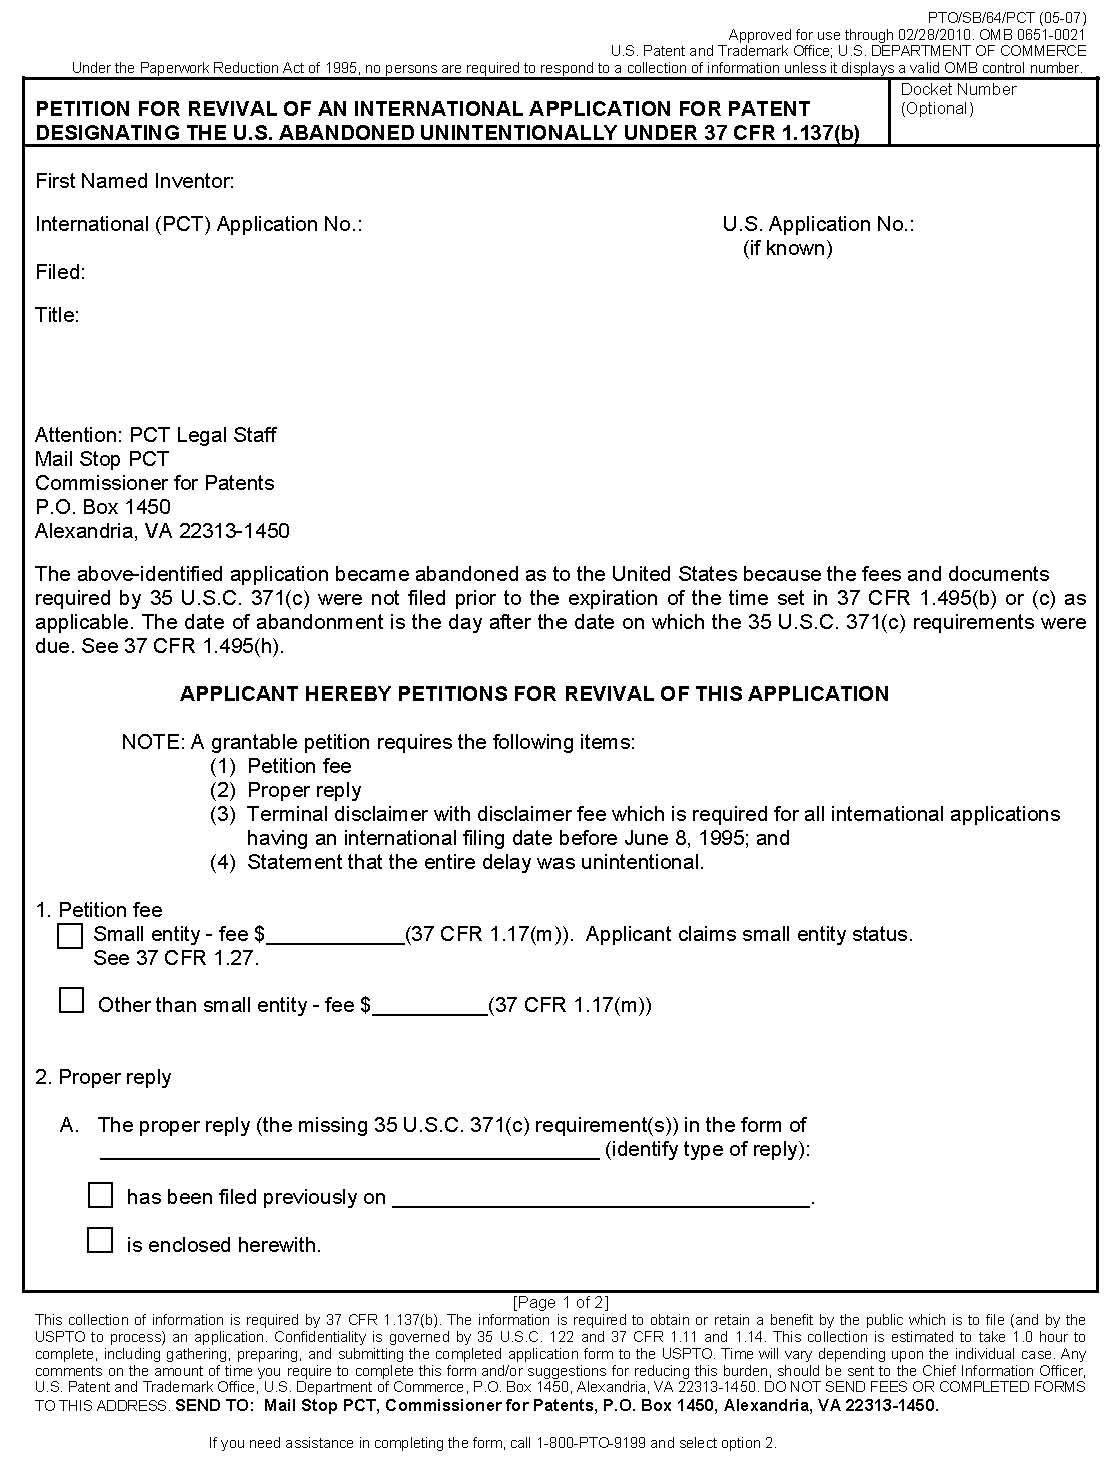 page 1 form pto/sb/64/pct petition for revival of an international application for patent designating the u.s. abandoned intentionally under 37 cfr 1.137(b).